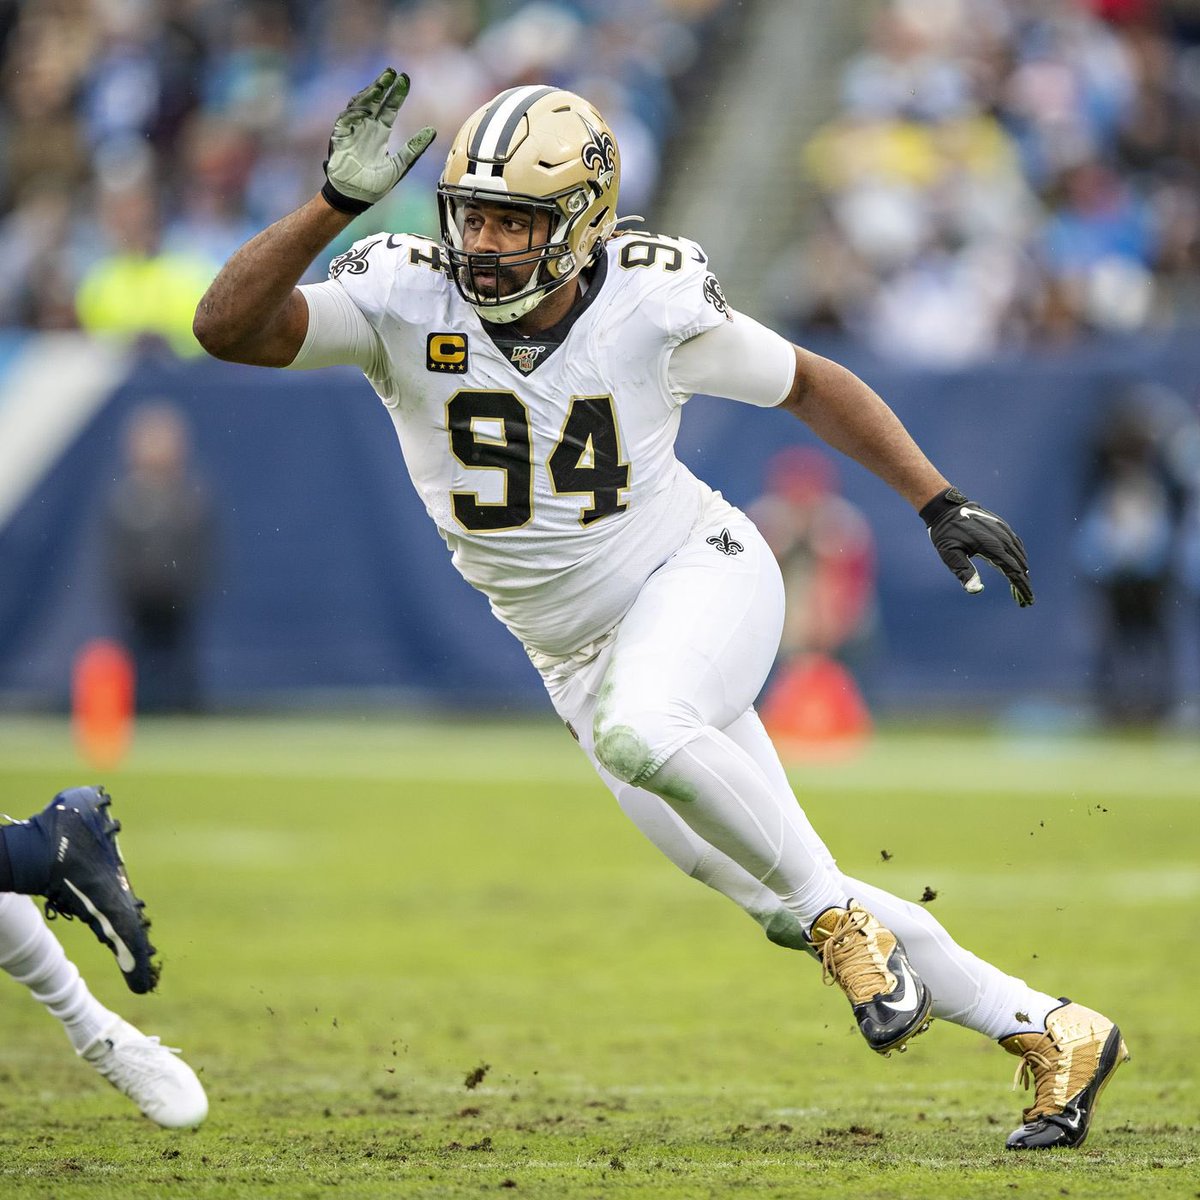 Wolves FB Alum @camjordan94 entering his 12th NFL season with the @Saints ! We appreciate your support and dedication to our kids at CHS FB … #GOAT